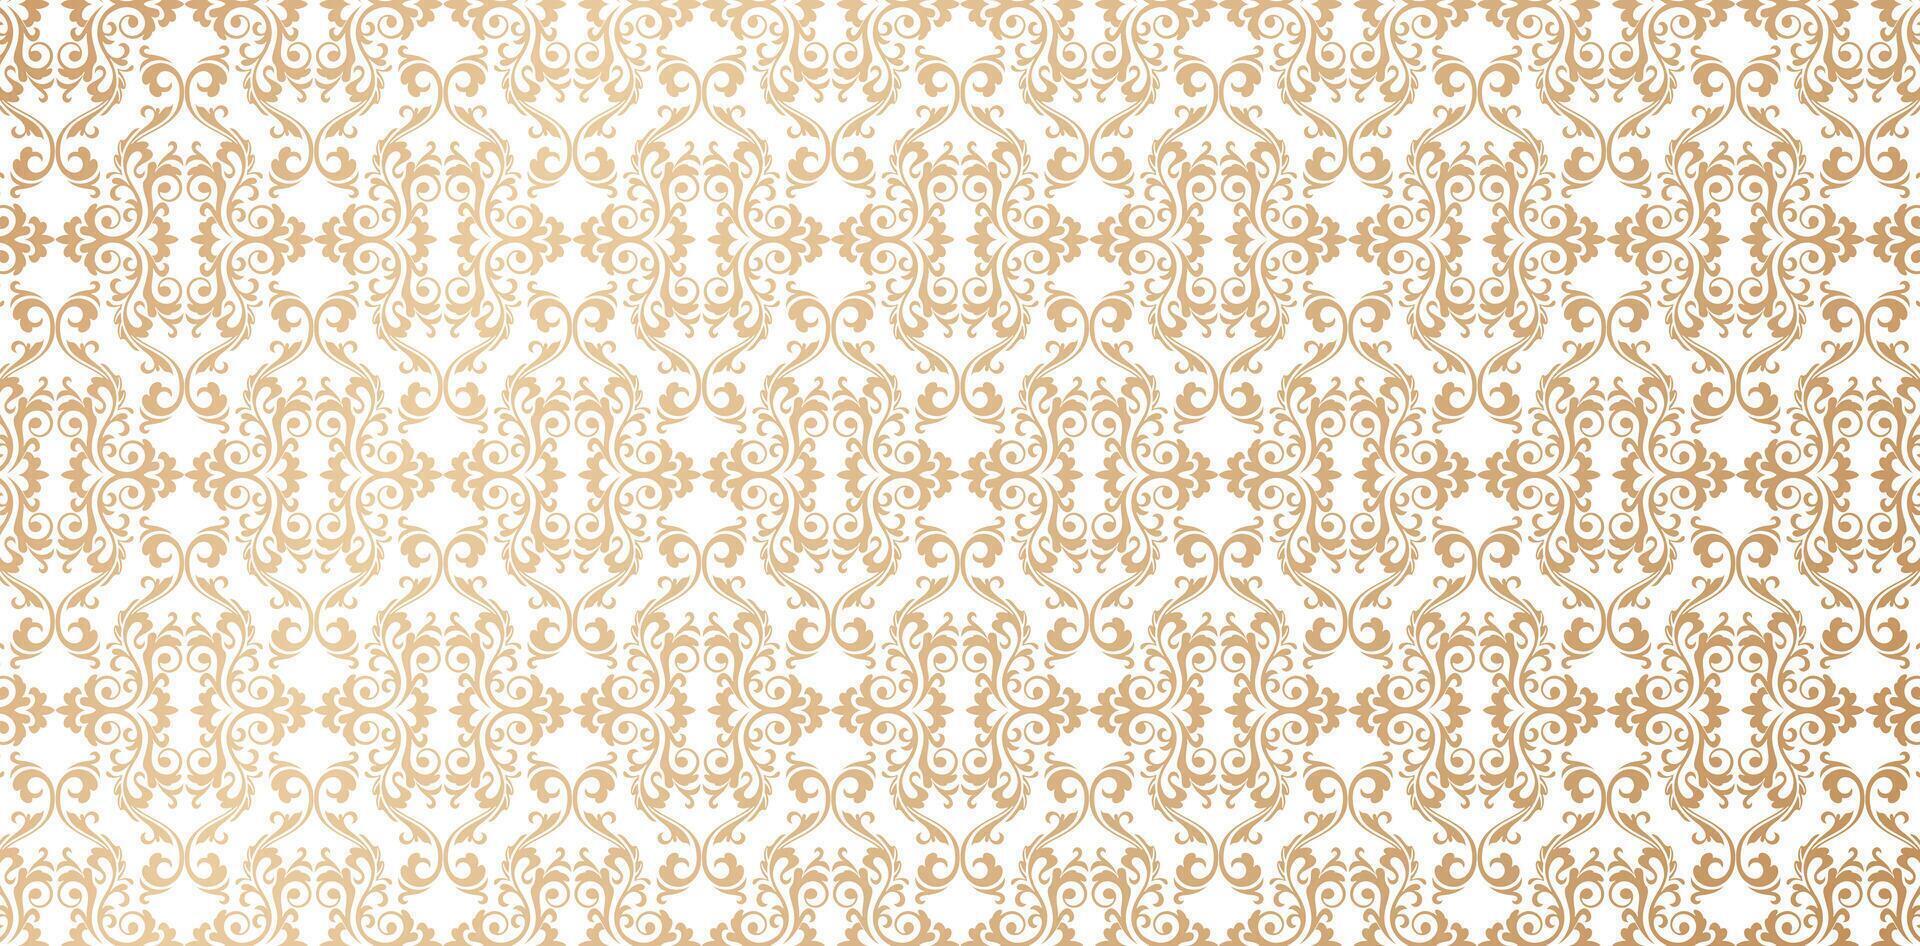 seamless knitted patterns with golden ornaments, traditional oriental ornaments classic vector illustration for Fashionable modern wallpaper or textiles, books cover, Digital interfaces, print designs